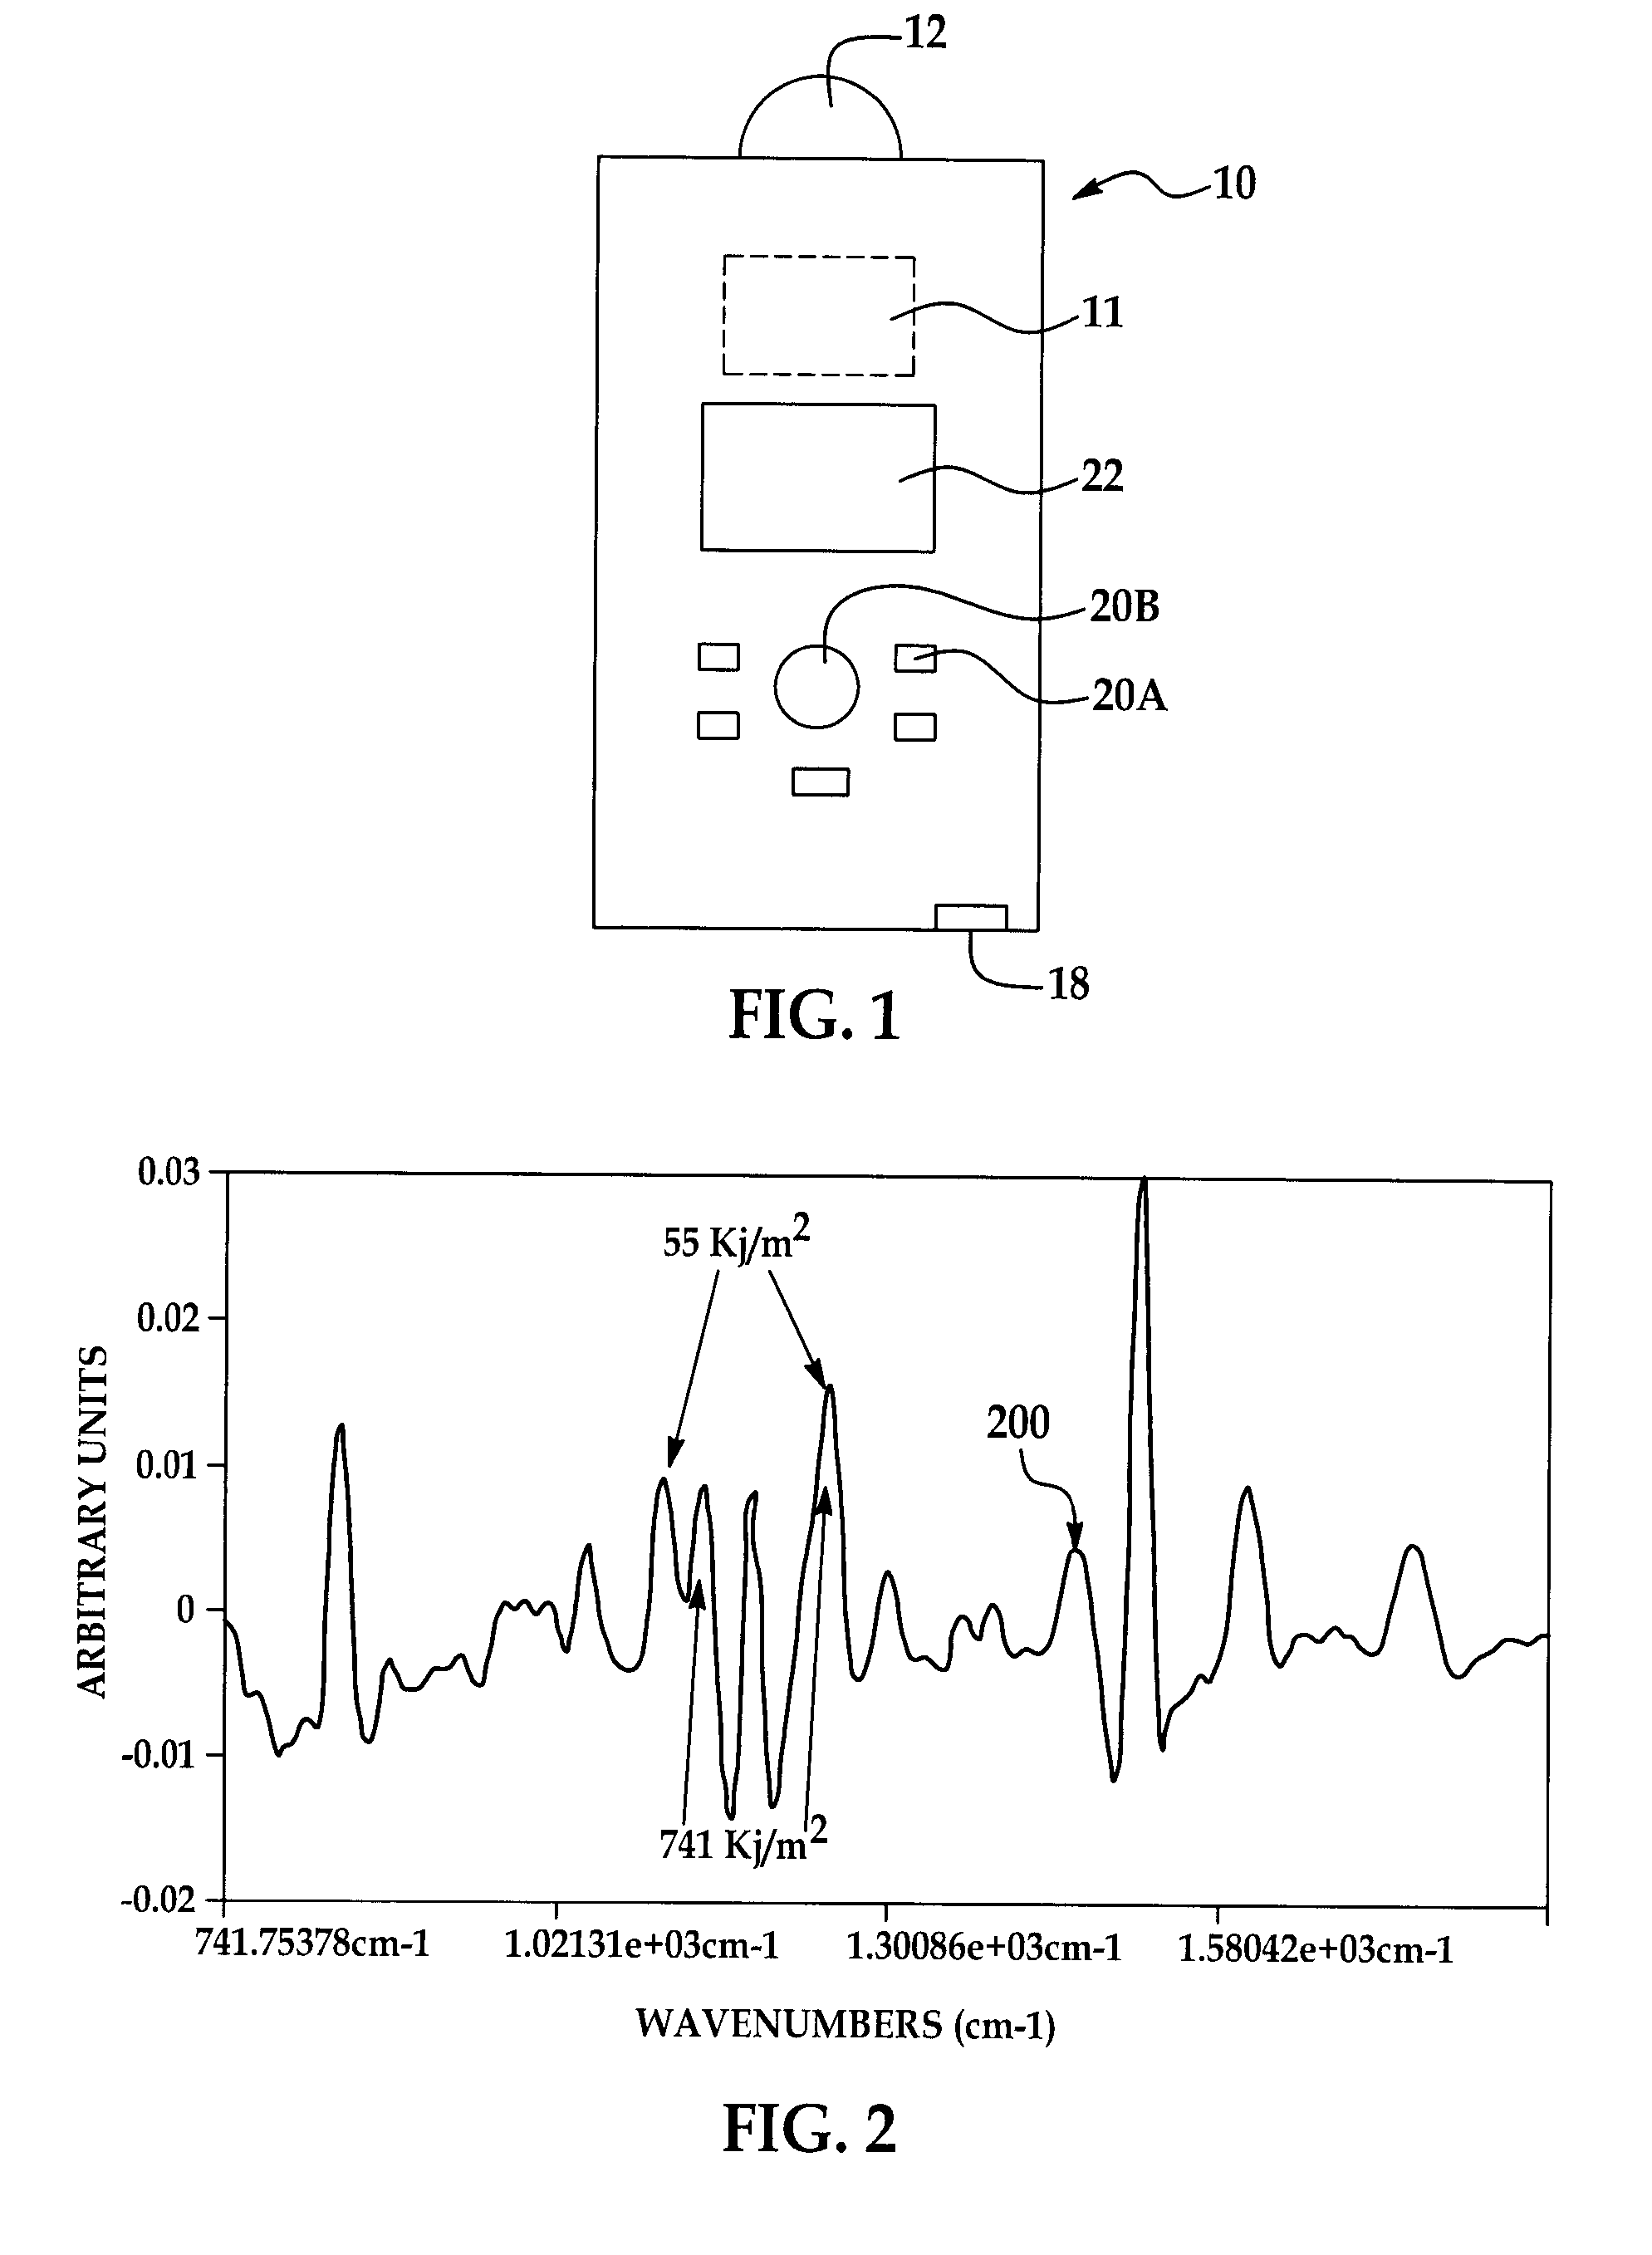 Method for performing ir spectroscopy measurements to quantify a level of UV effect